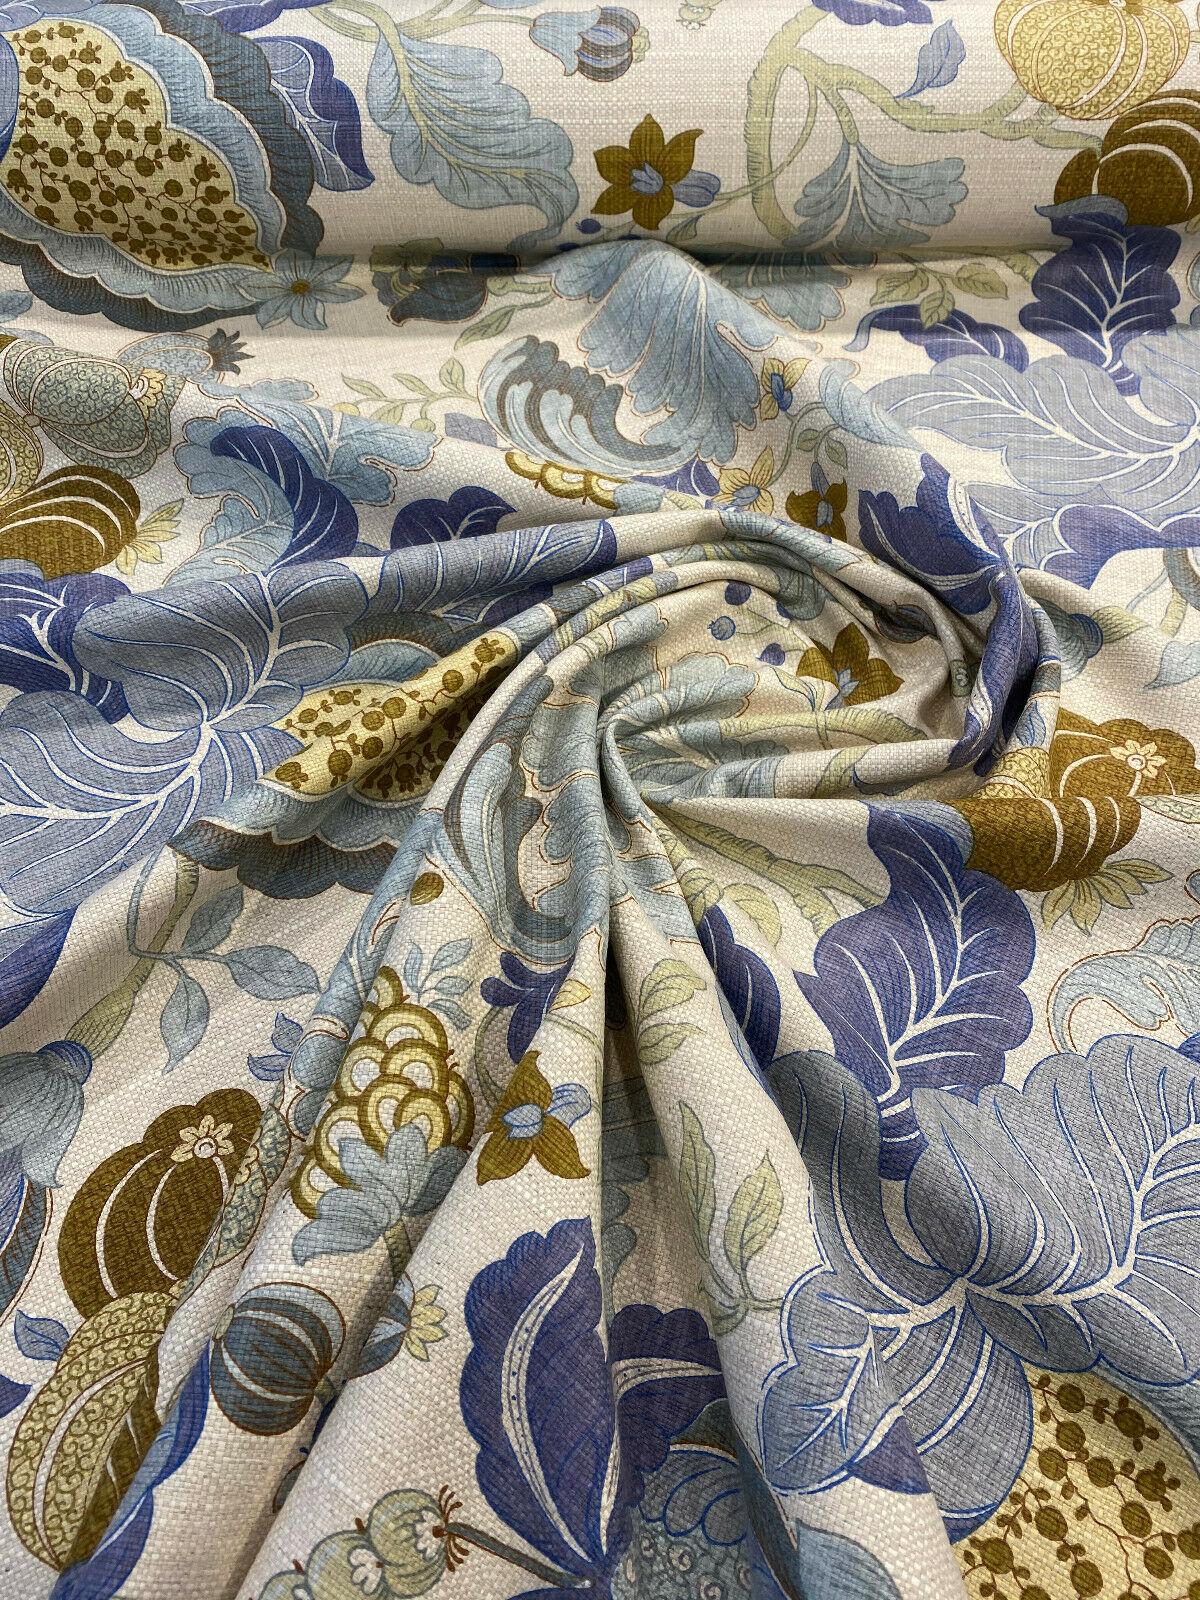 Isadore Blue Floral Cotton Linen Upholstery Fabric by the Yard